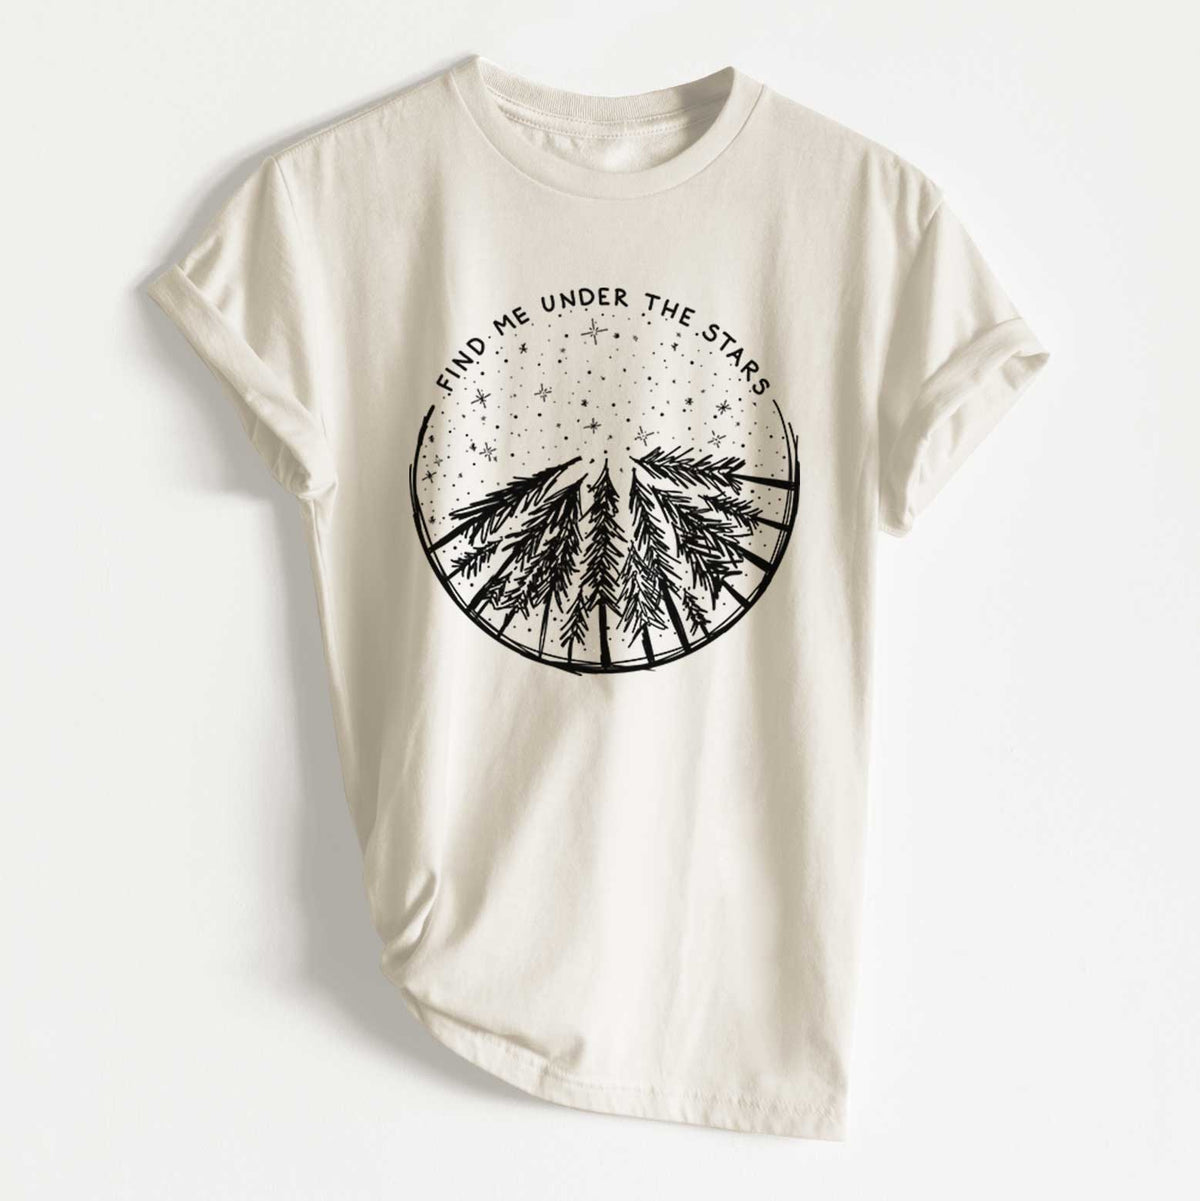 Find Me Under the Stars - Unisex Recycled Eco Tee  - CLOSEOUT - FINAL SALE